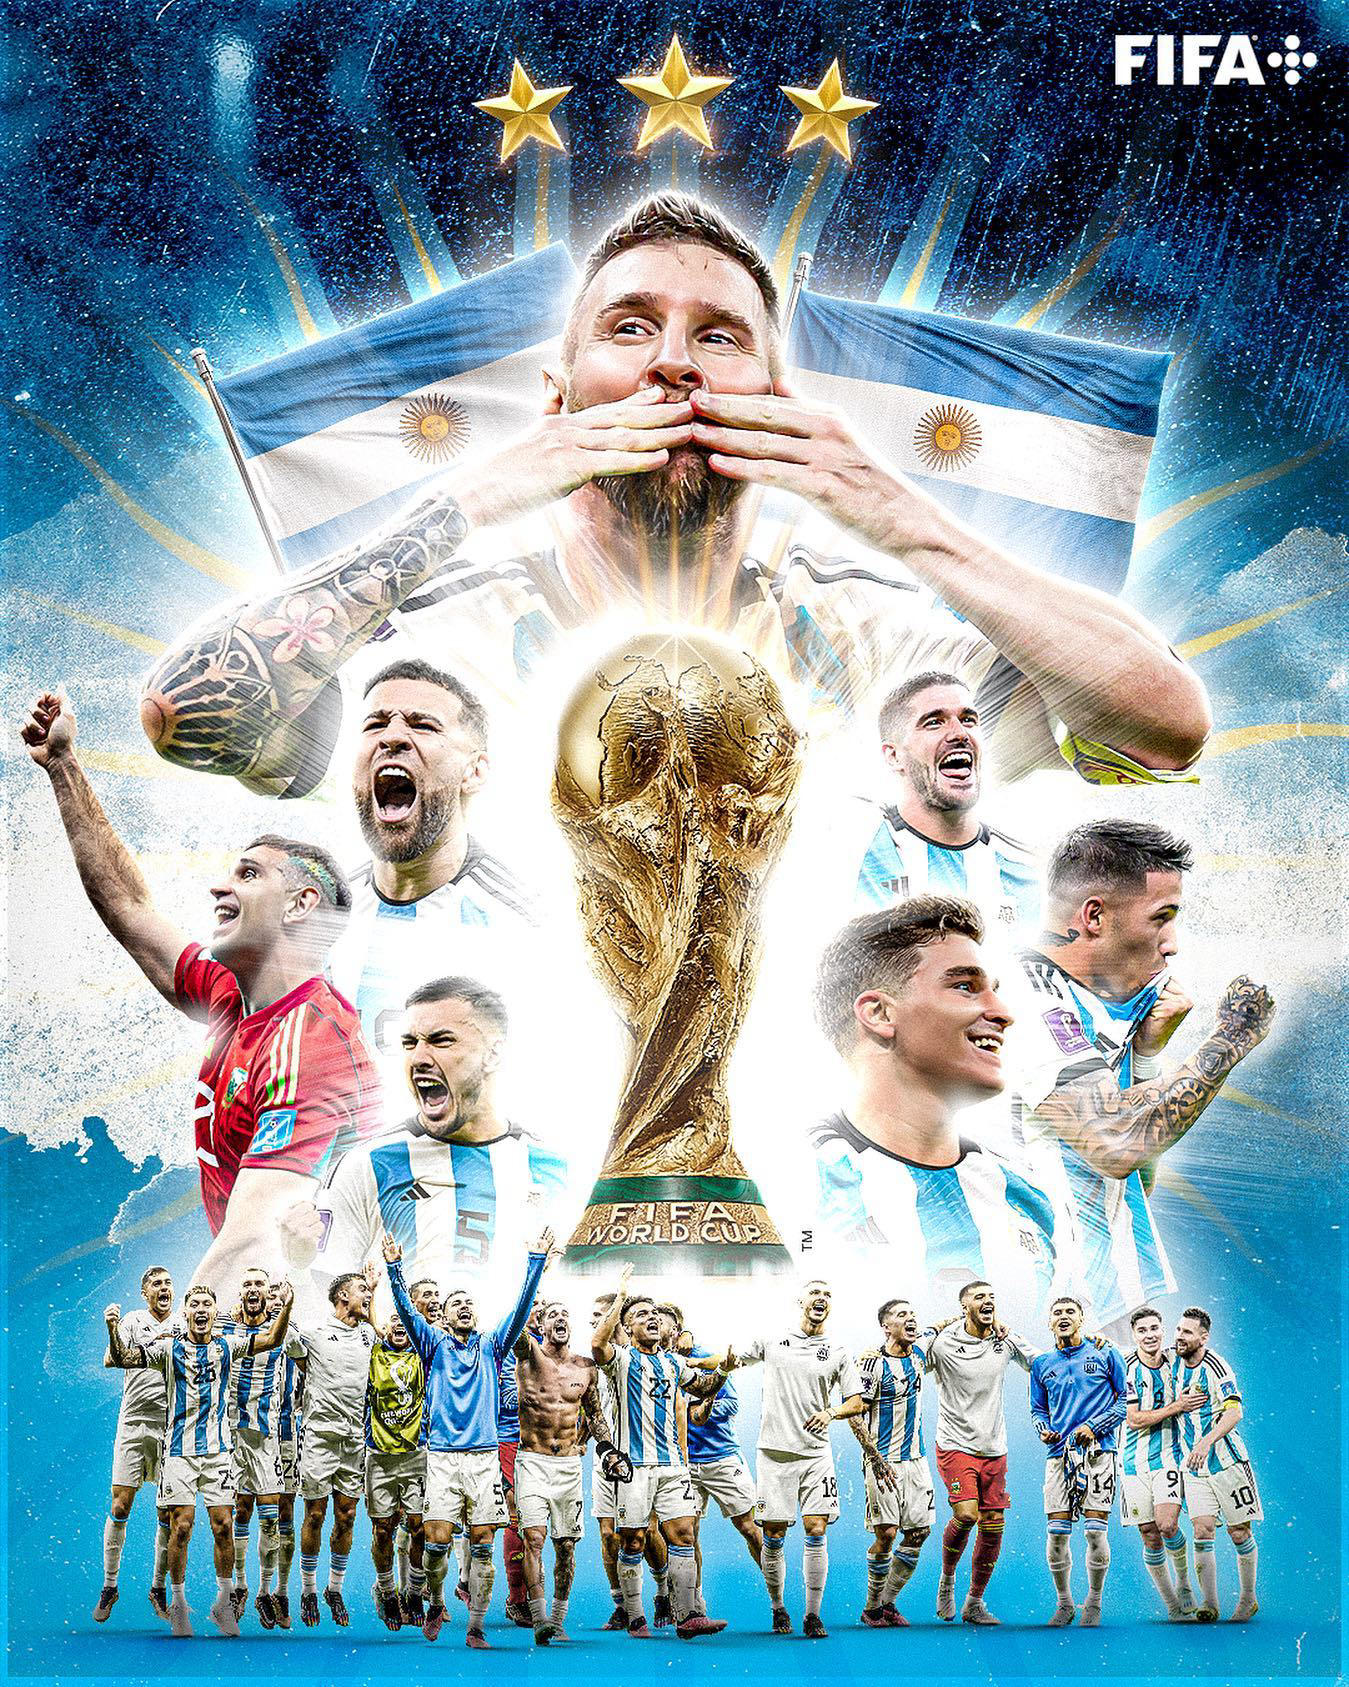 FIFA World Cup - 🇦🇷 ARGENTINA ARE #FIFAWORLDCUP CHAMPIONS